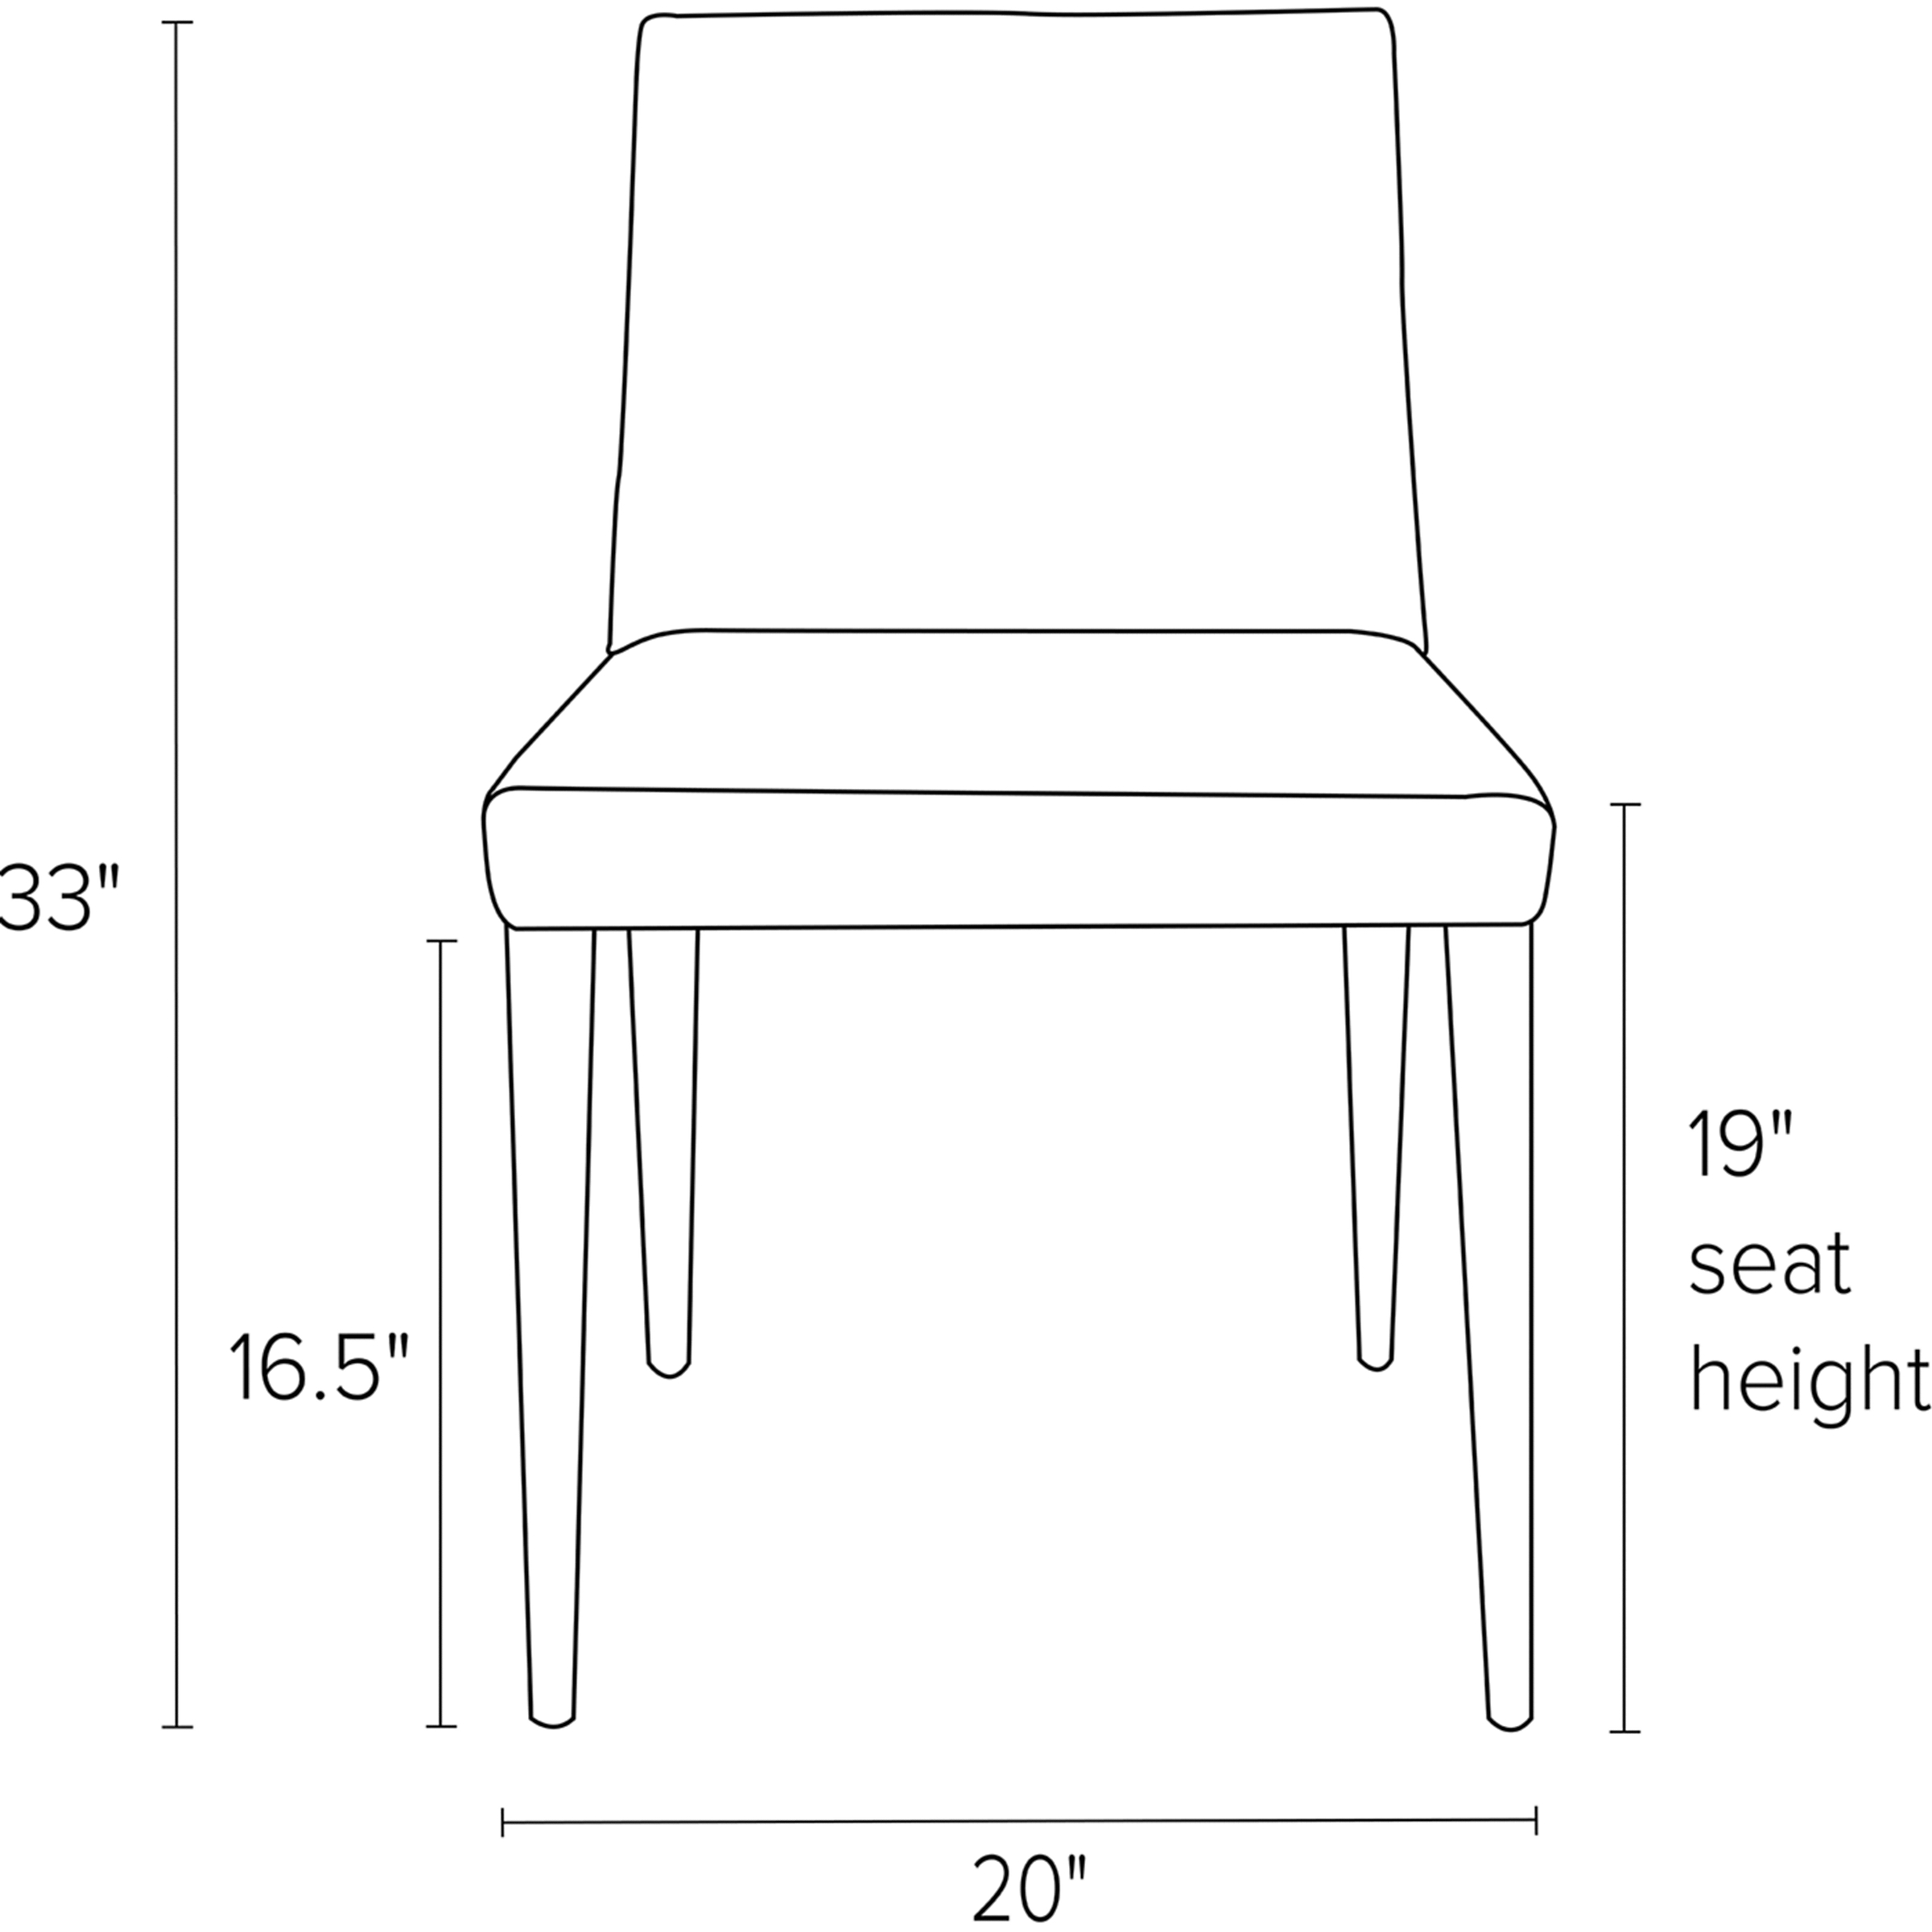 Front view dimension illustration of Ava side chair.